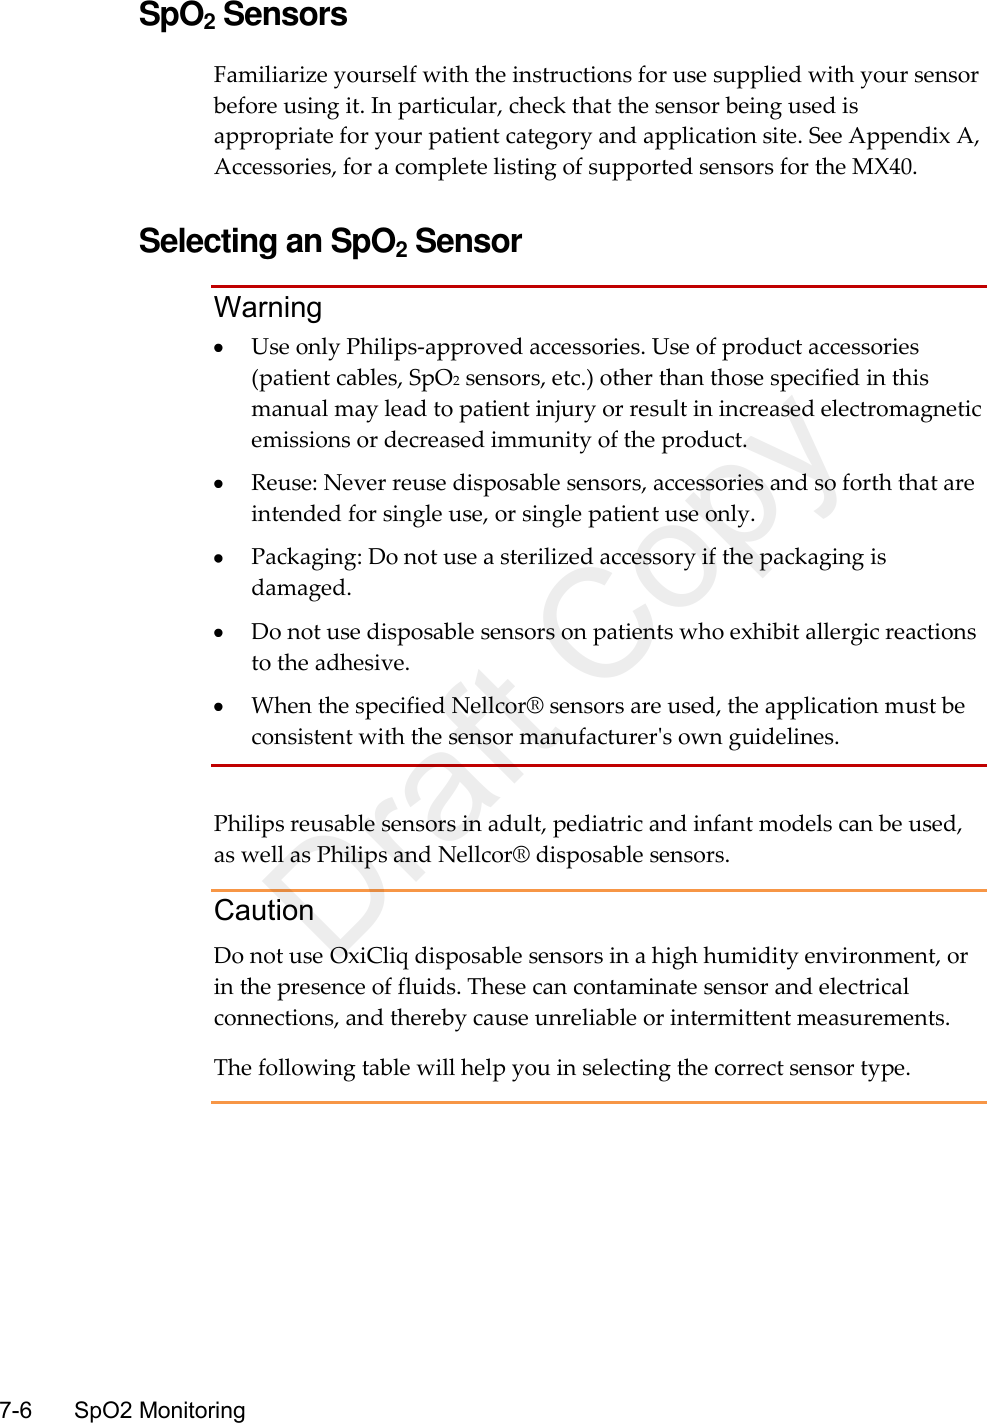    7-6    SpO2 Monitoring  SpO2 Sensors Familiarize yourself with the instructions for use supplied with your sensor before using it. In particular, check that the sensor being used is appropriate for your patient category and application site. See Appendix A, Accessories, for a complete listing of supported sensors for the MX40.  Selecting an SpO2 Sensor Warning  Use only Philips-approved accessories. Use of product accessories (patient cables, SpO2 sensors, etc.) other than those specified in this manual may lead to patient injury or result in increased electromagnetic emissions or decreased immunity of the product.  Reuse: Never reuse disposable sensors, accessories and so forth that are intended for single use, or single patient use only.  Packaging: Do not use a sterilized accessory if the packaging is damaged.  Do not use disposable sensors on patients who exhibit allergic reactions to the adhesive.  When the specified Nellcor® sensors are used, the application must be consistent with the sensor manufacturer&apos;s own guidelines.  Philips reusable sensors in adult, pediatric and infant models can be used, as well as Philips and Nellcor® disposable sensors. Caution Do not use OxiCliq disposable sensors in a high humidity environment, or in the presence of fluids. These can contaminate sensor and electrical connections, and thereby cause unreliable or intermittent measurements. The following table will help you in selecting the correct sensor type.  Draft Copy